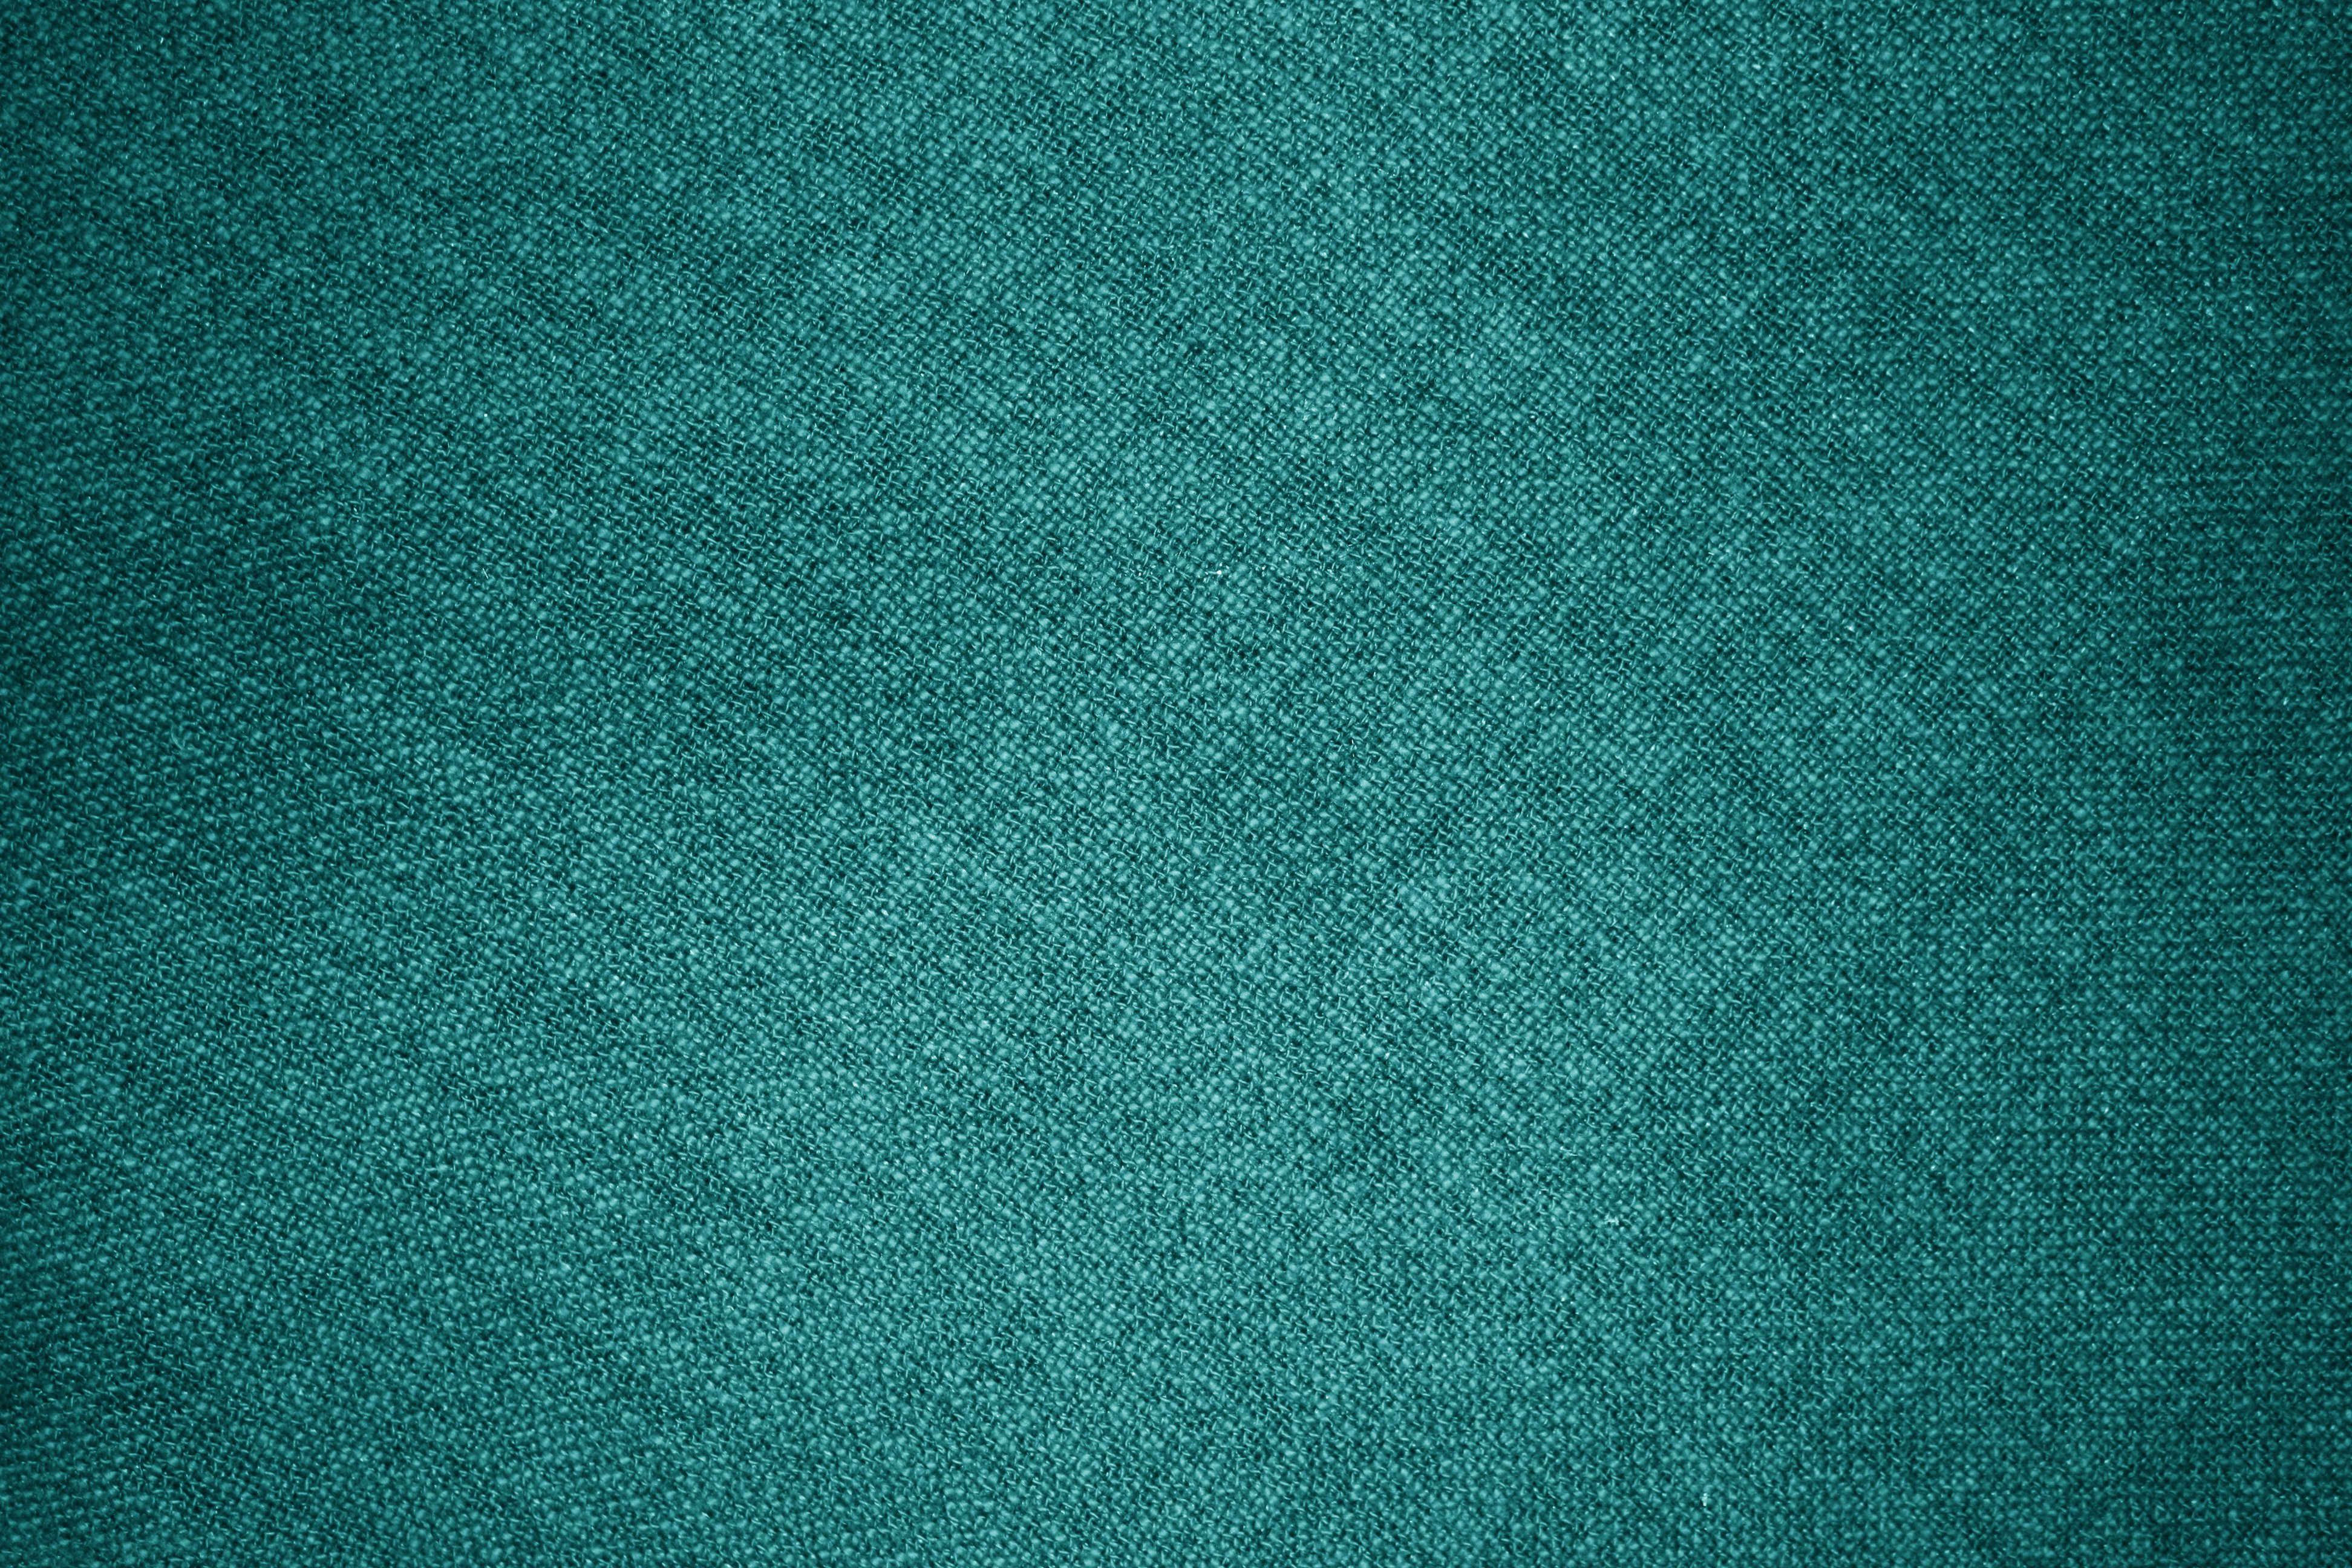 Teal Textured Paper Background Fabric Texture